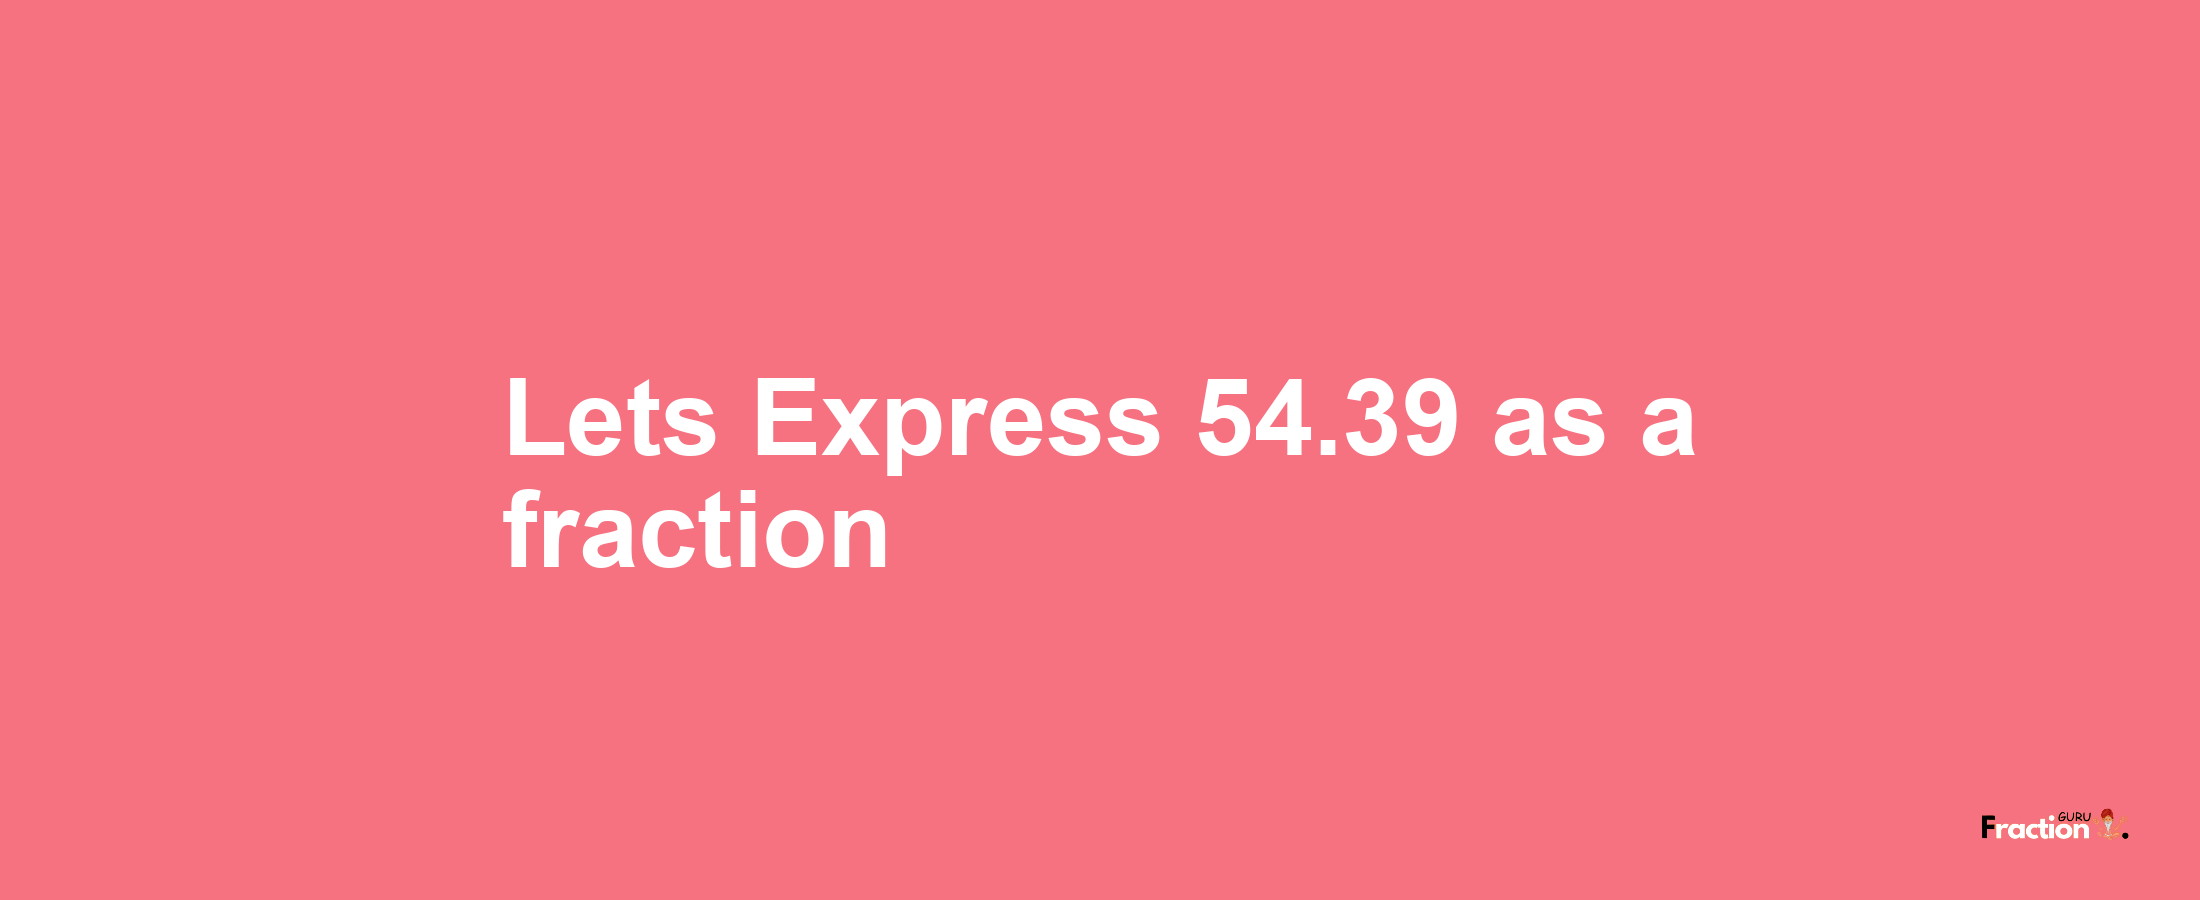 Lets Express 54.39 as afraction